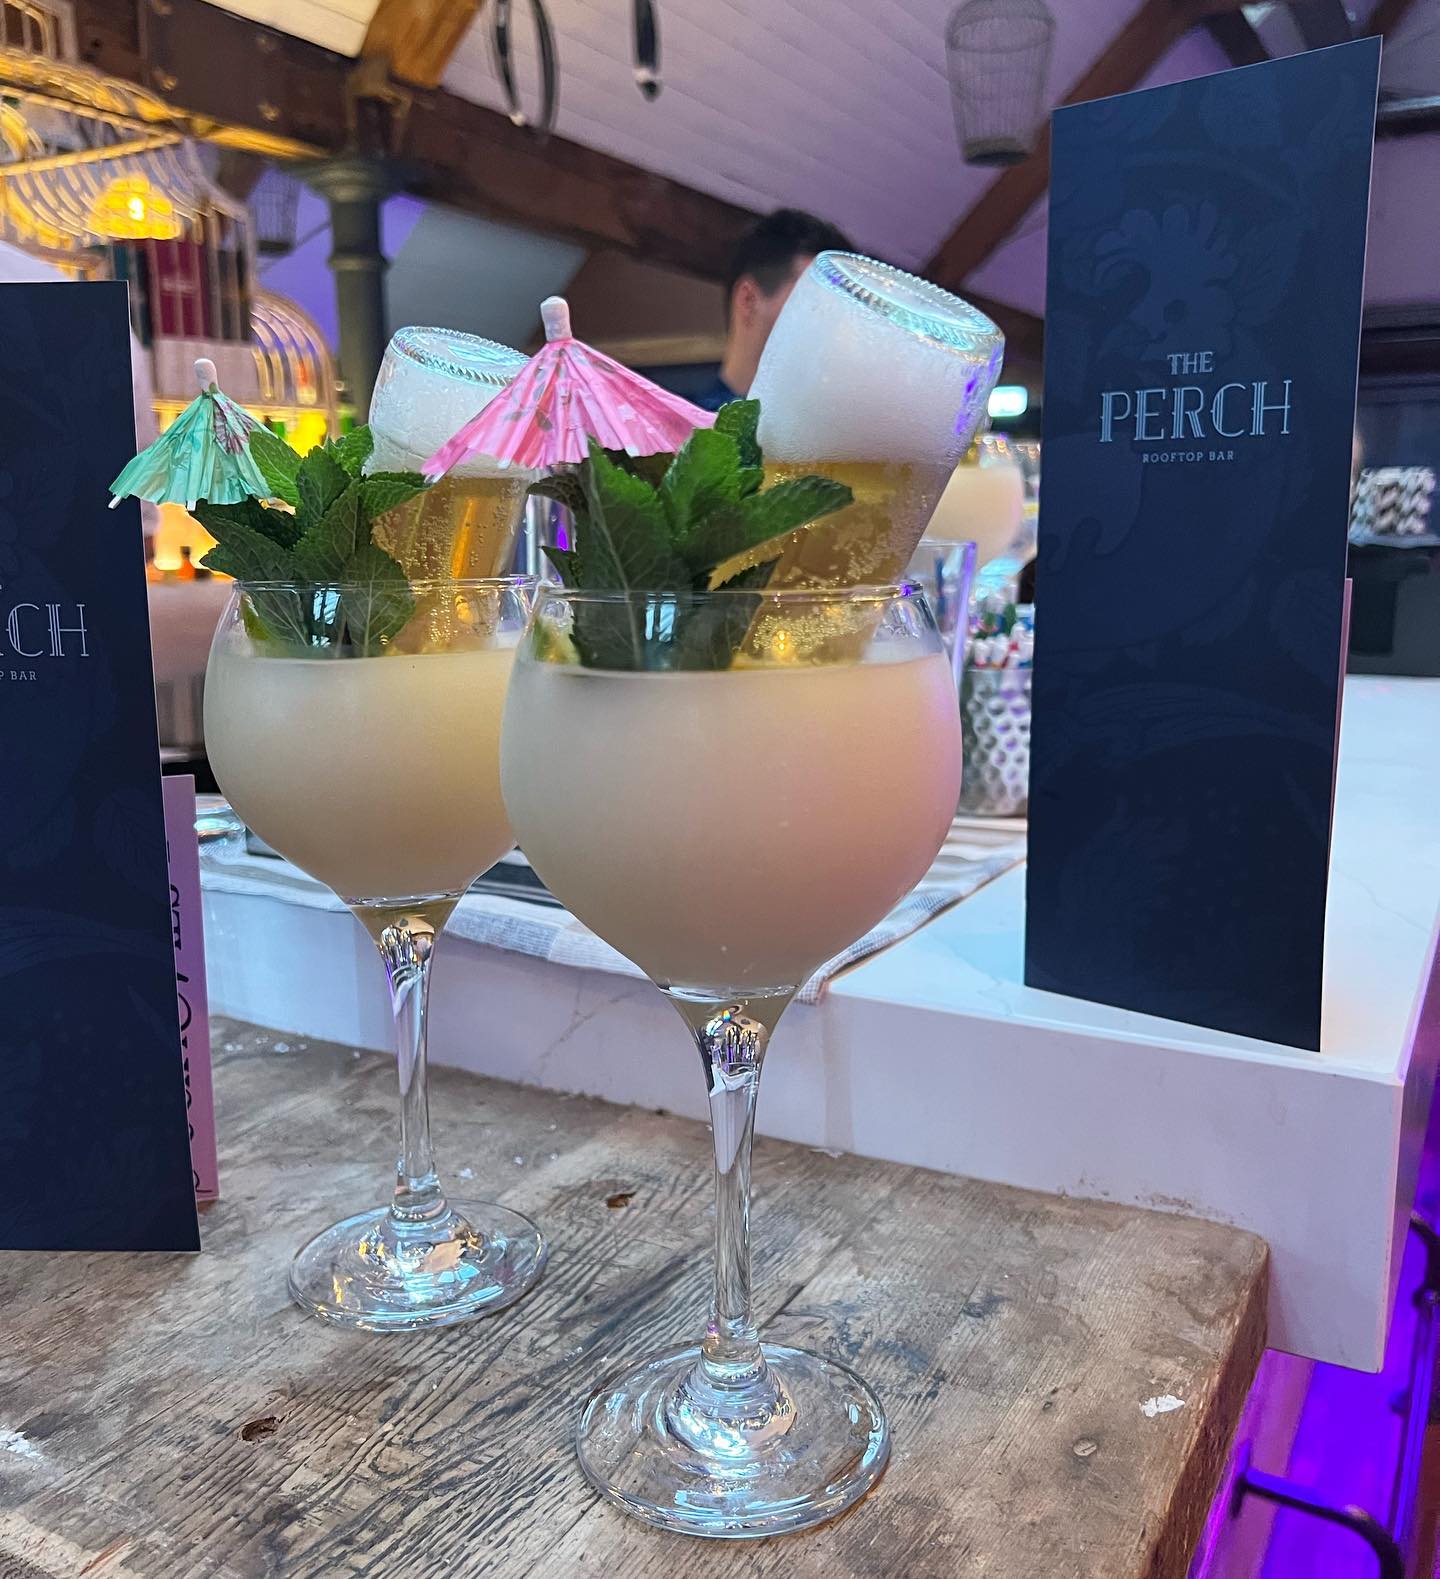 Perch reopens after extensive revamp